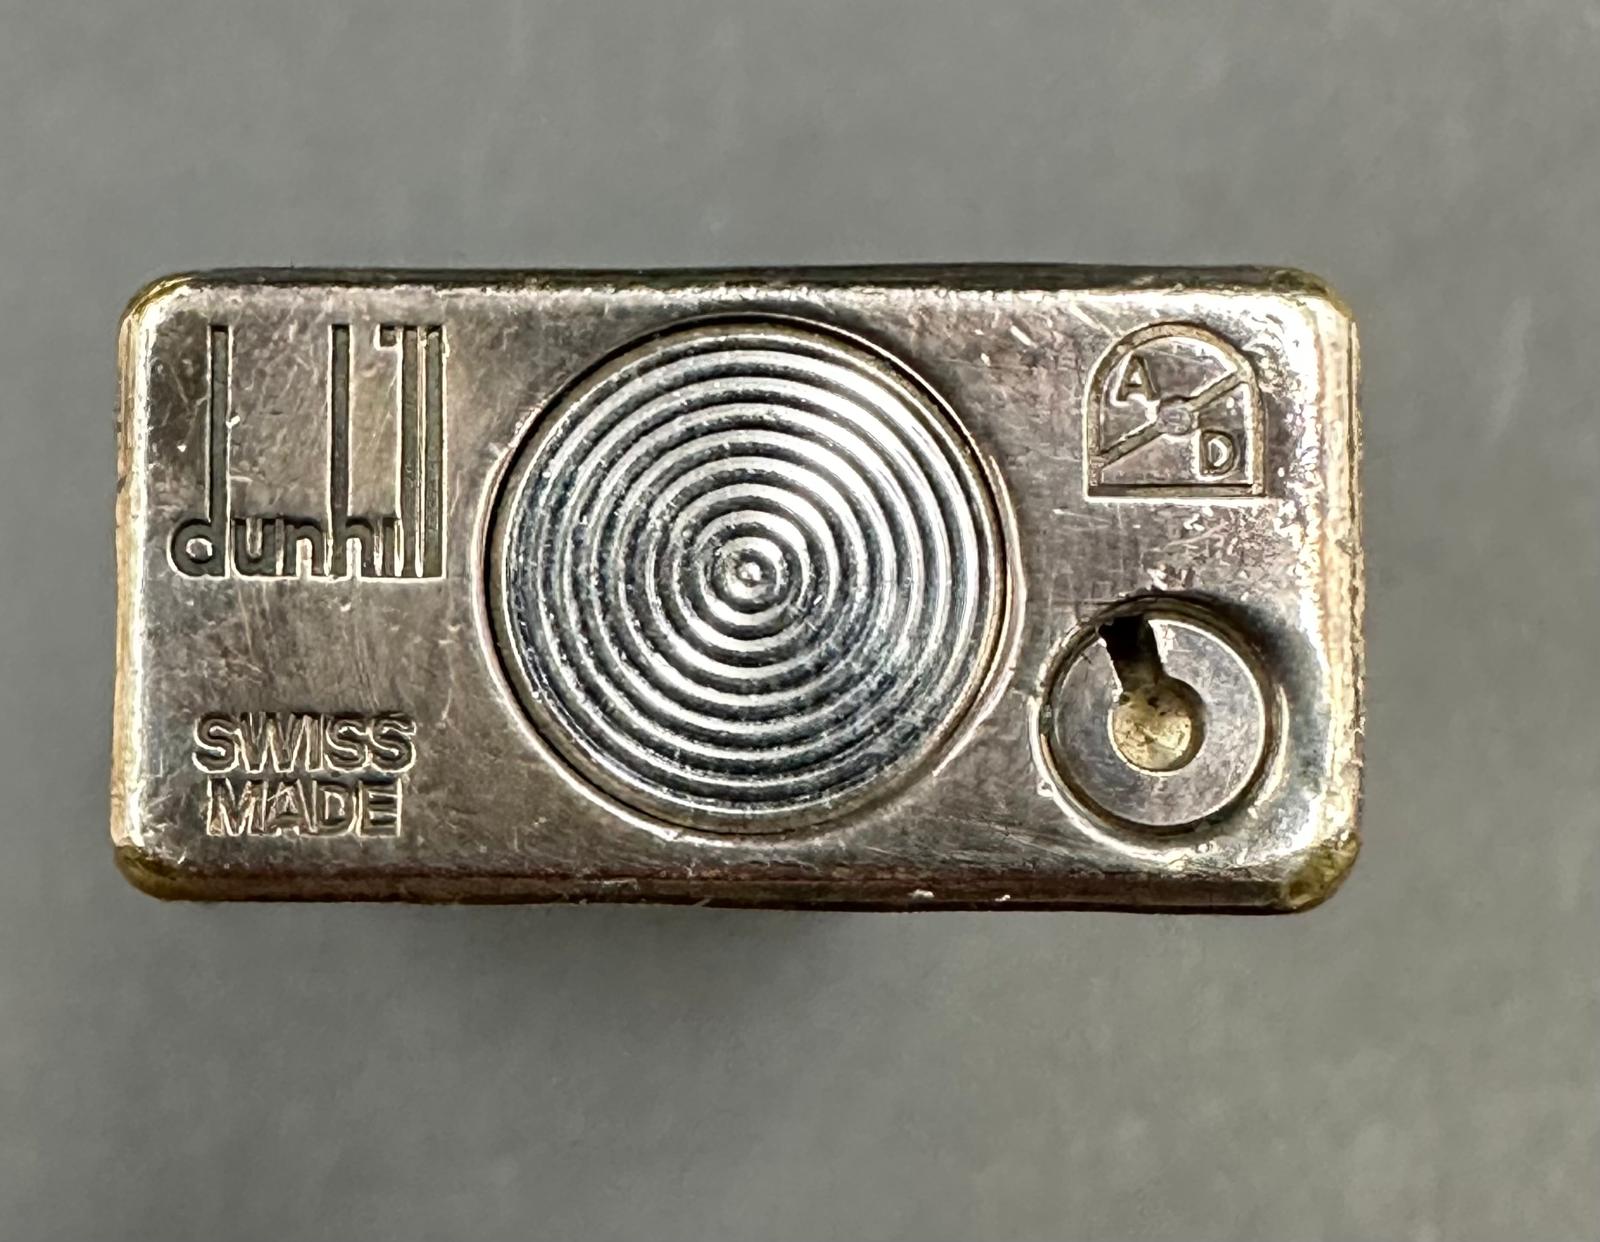 A Dunhill white metal lighter in original box with original paperwork, cards etc. - Image 5 of 5